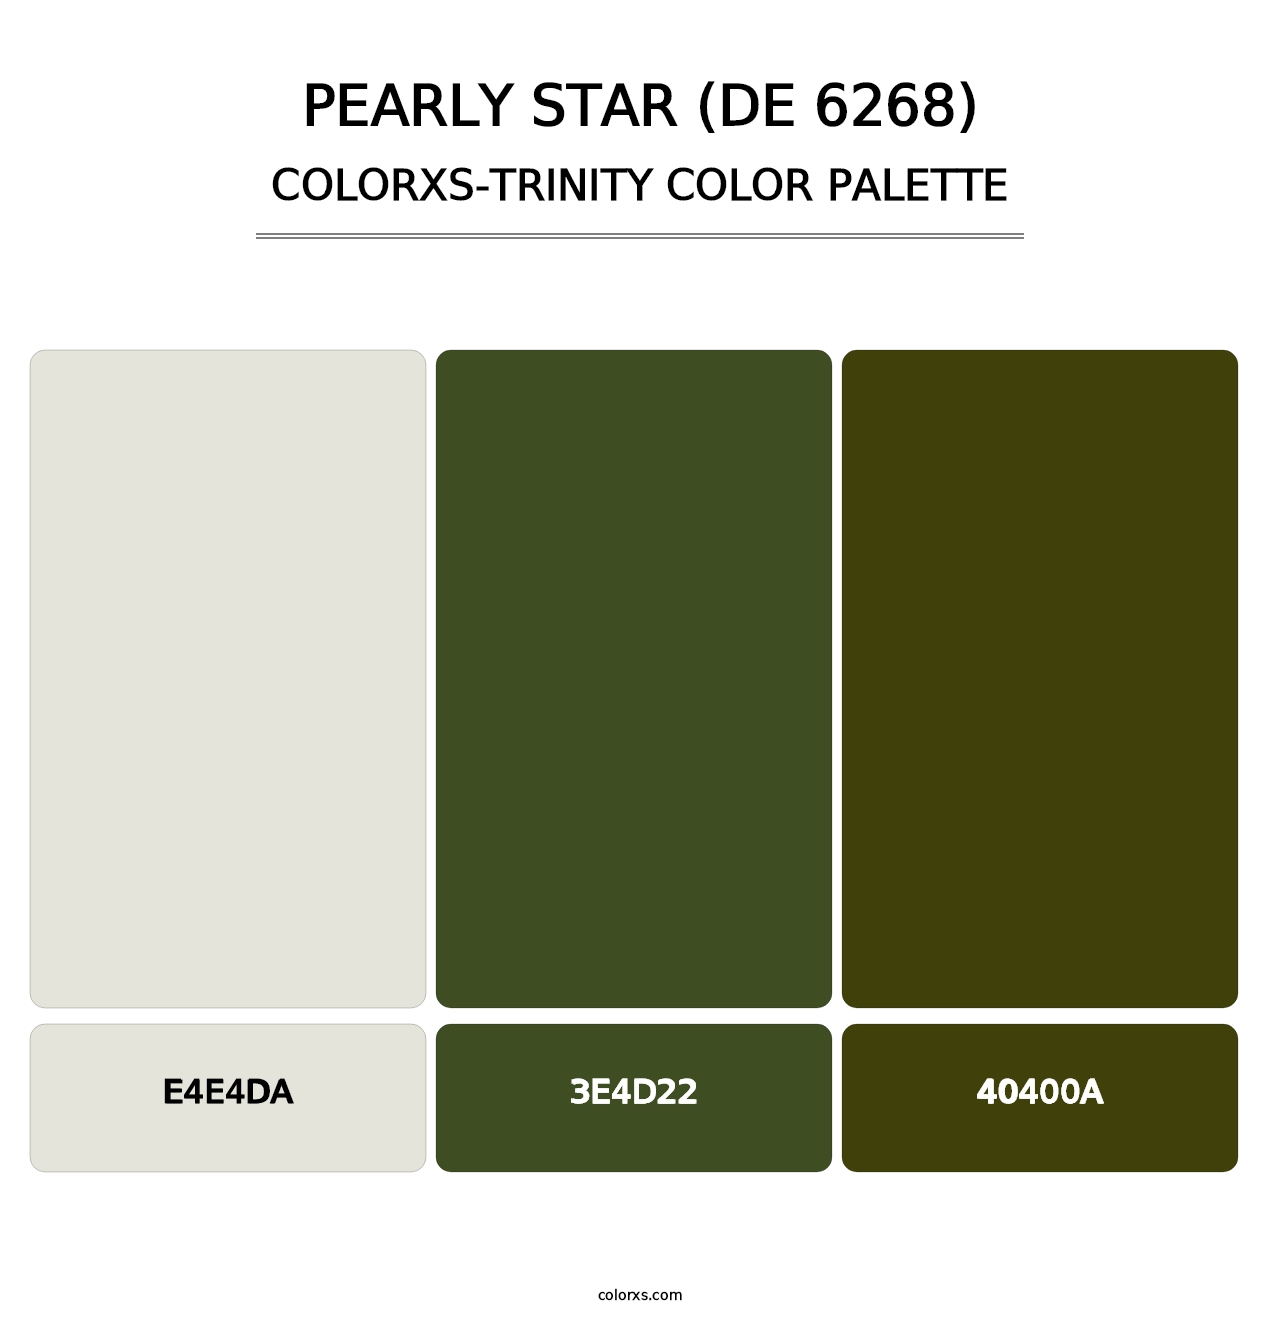 Pearly Star (DE 6268) - Colorxs Trinity Palette